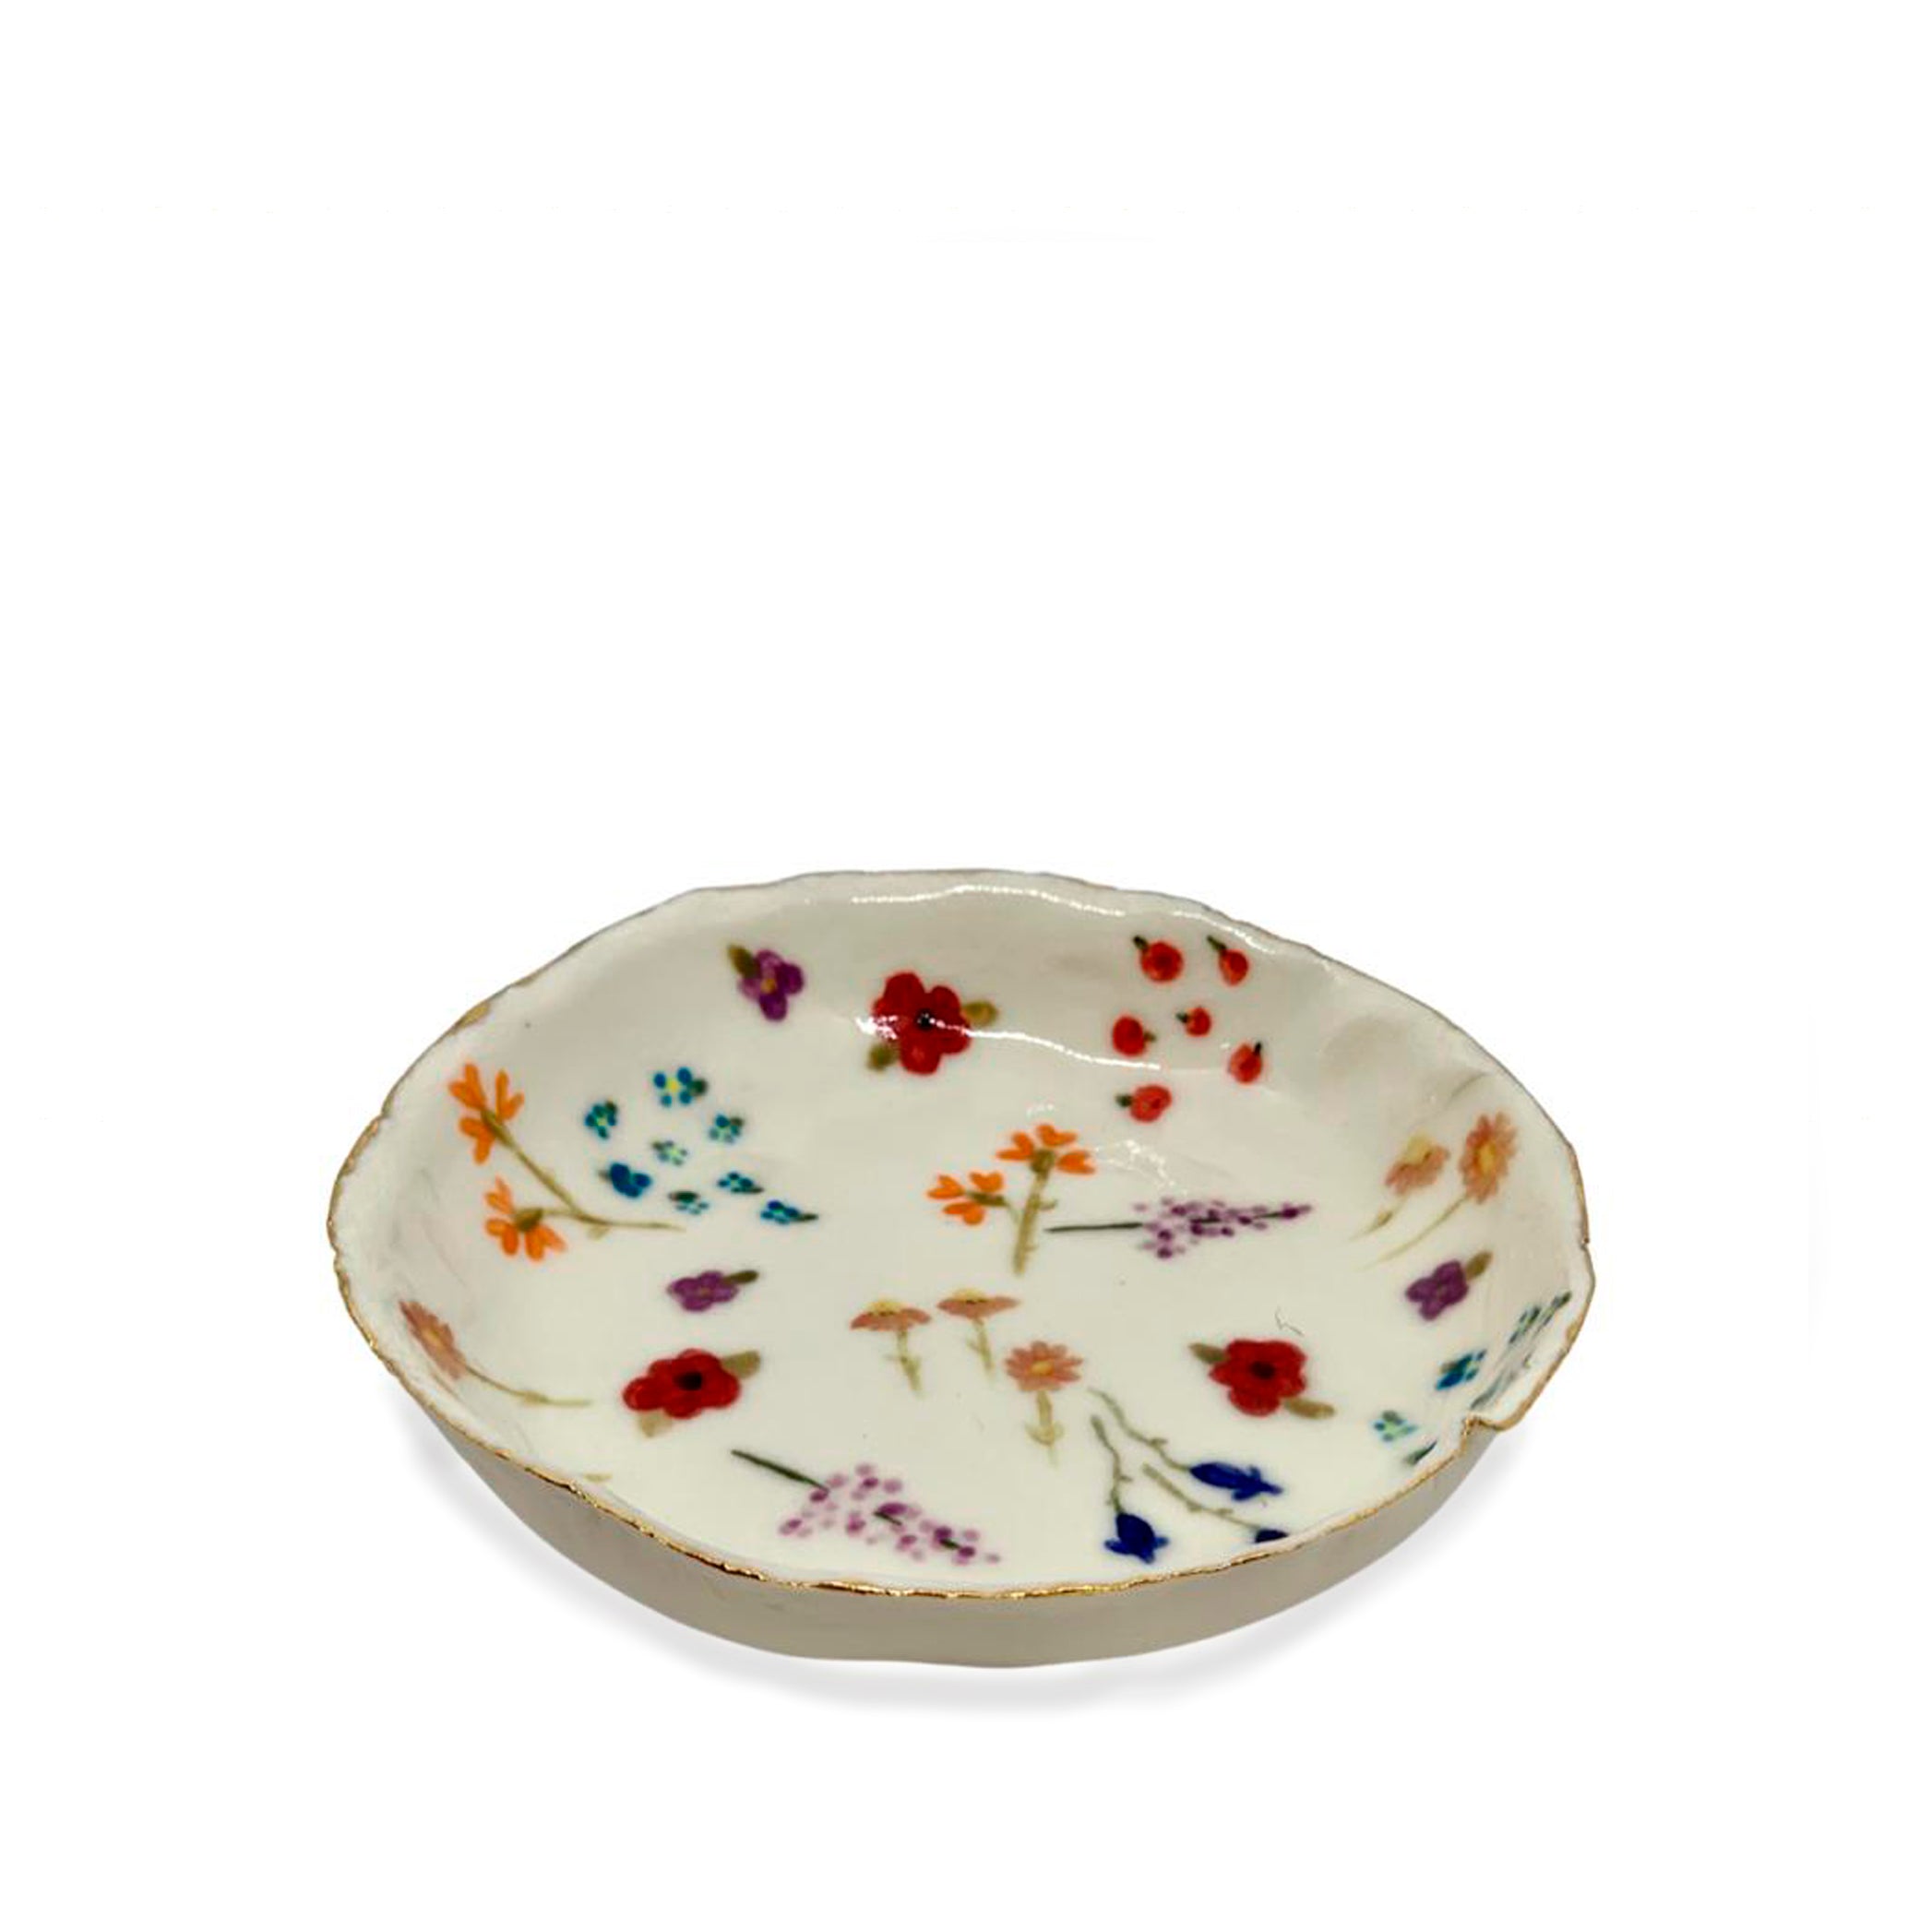 HB Jagged Bowl with Hand Painted Florals, 14cm